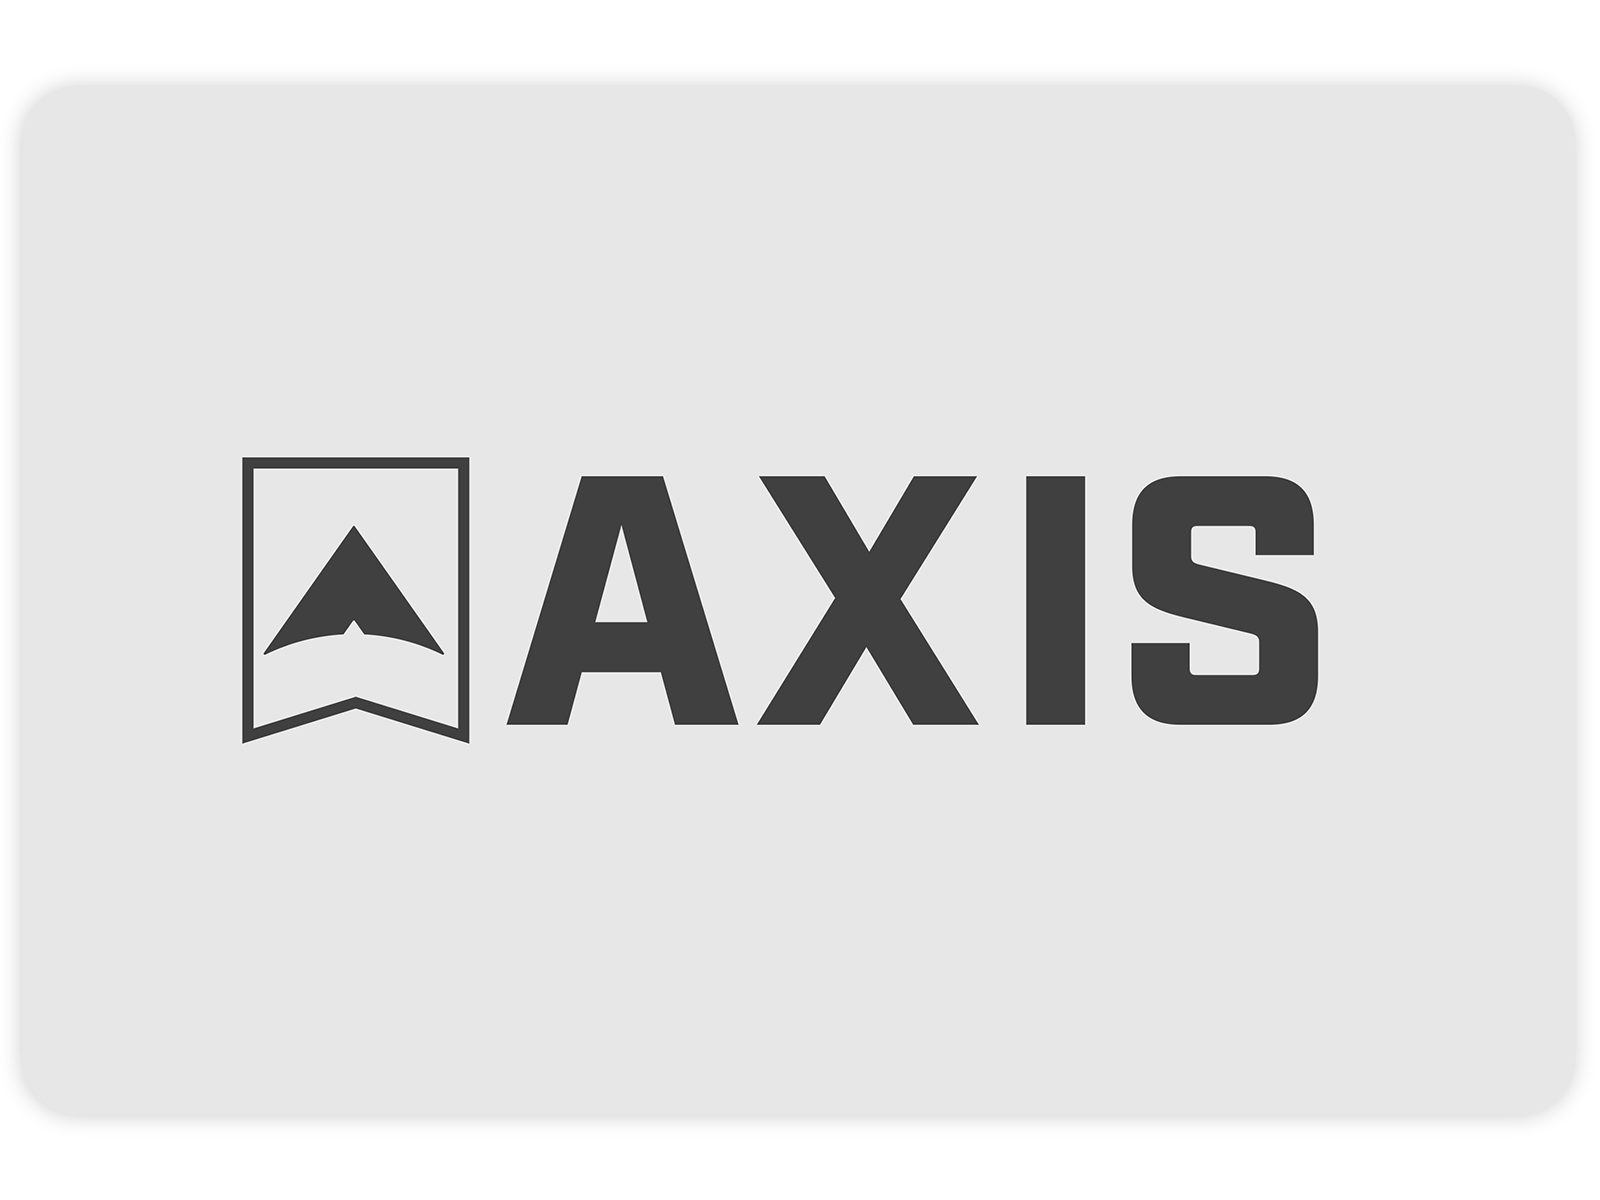 AXIS by Chris Watson on Dribbble